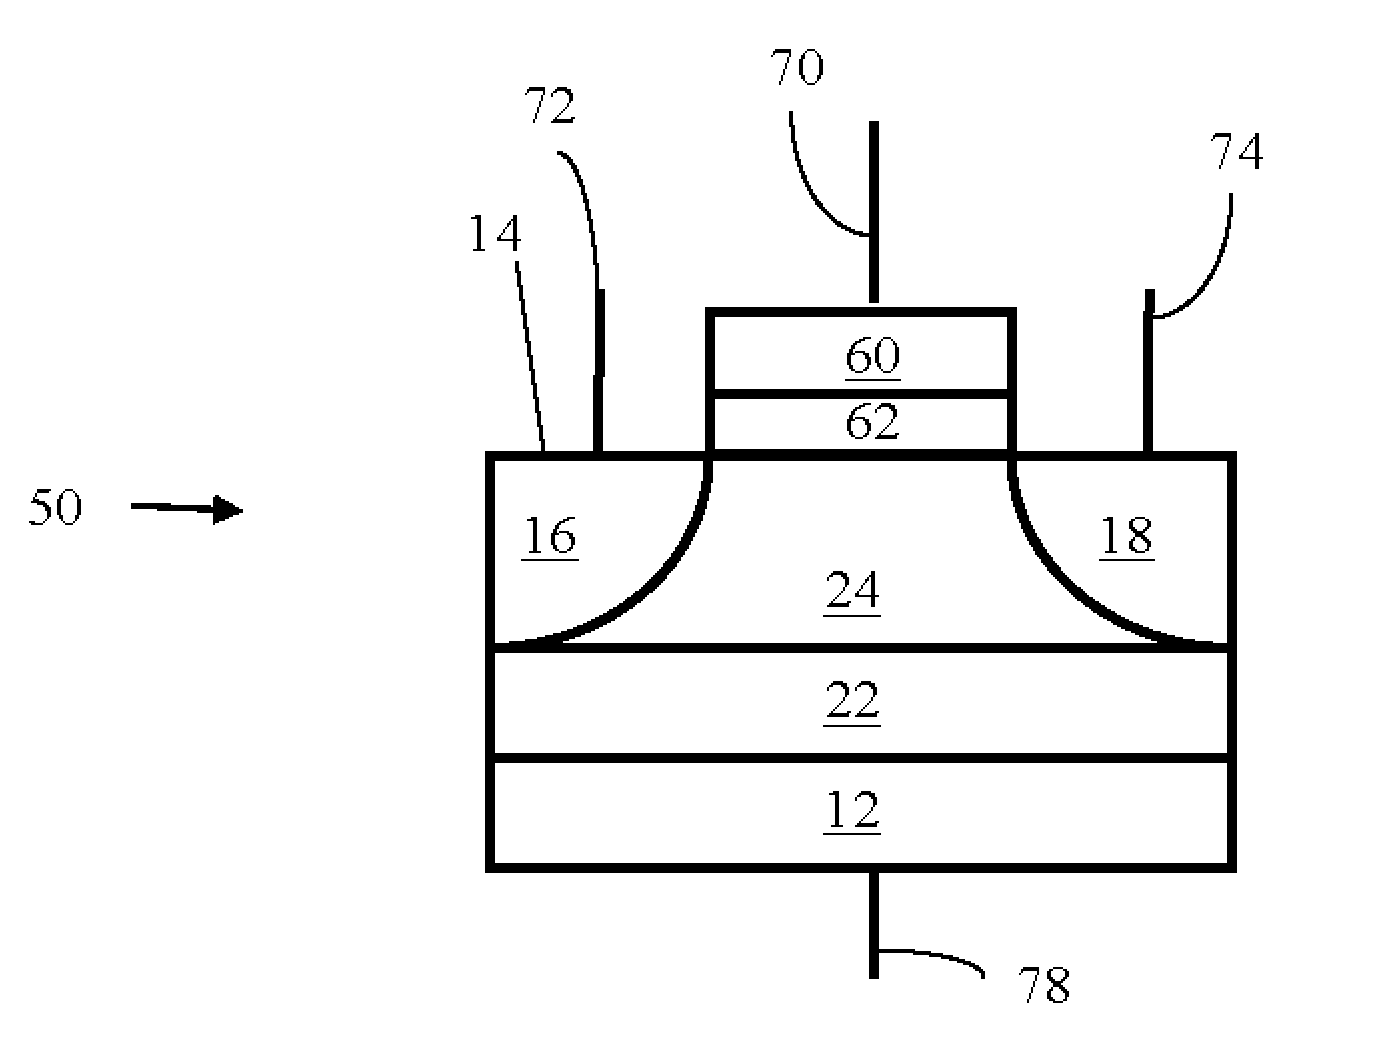 Compact Semiconductor Memory Device Having Reduced Number of Contacts, Methods of Operating and Methods of Making